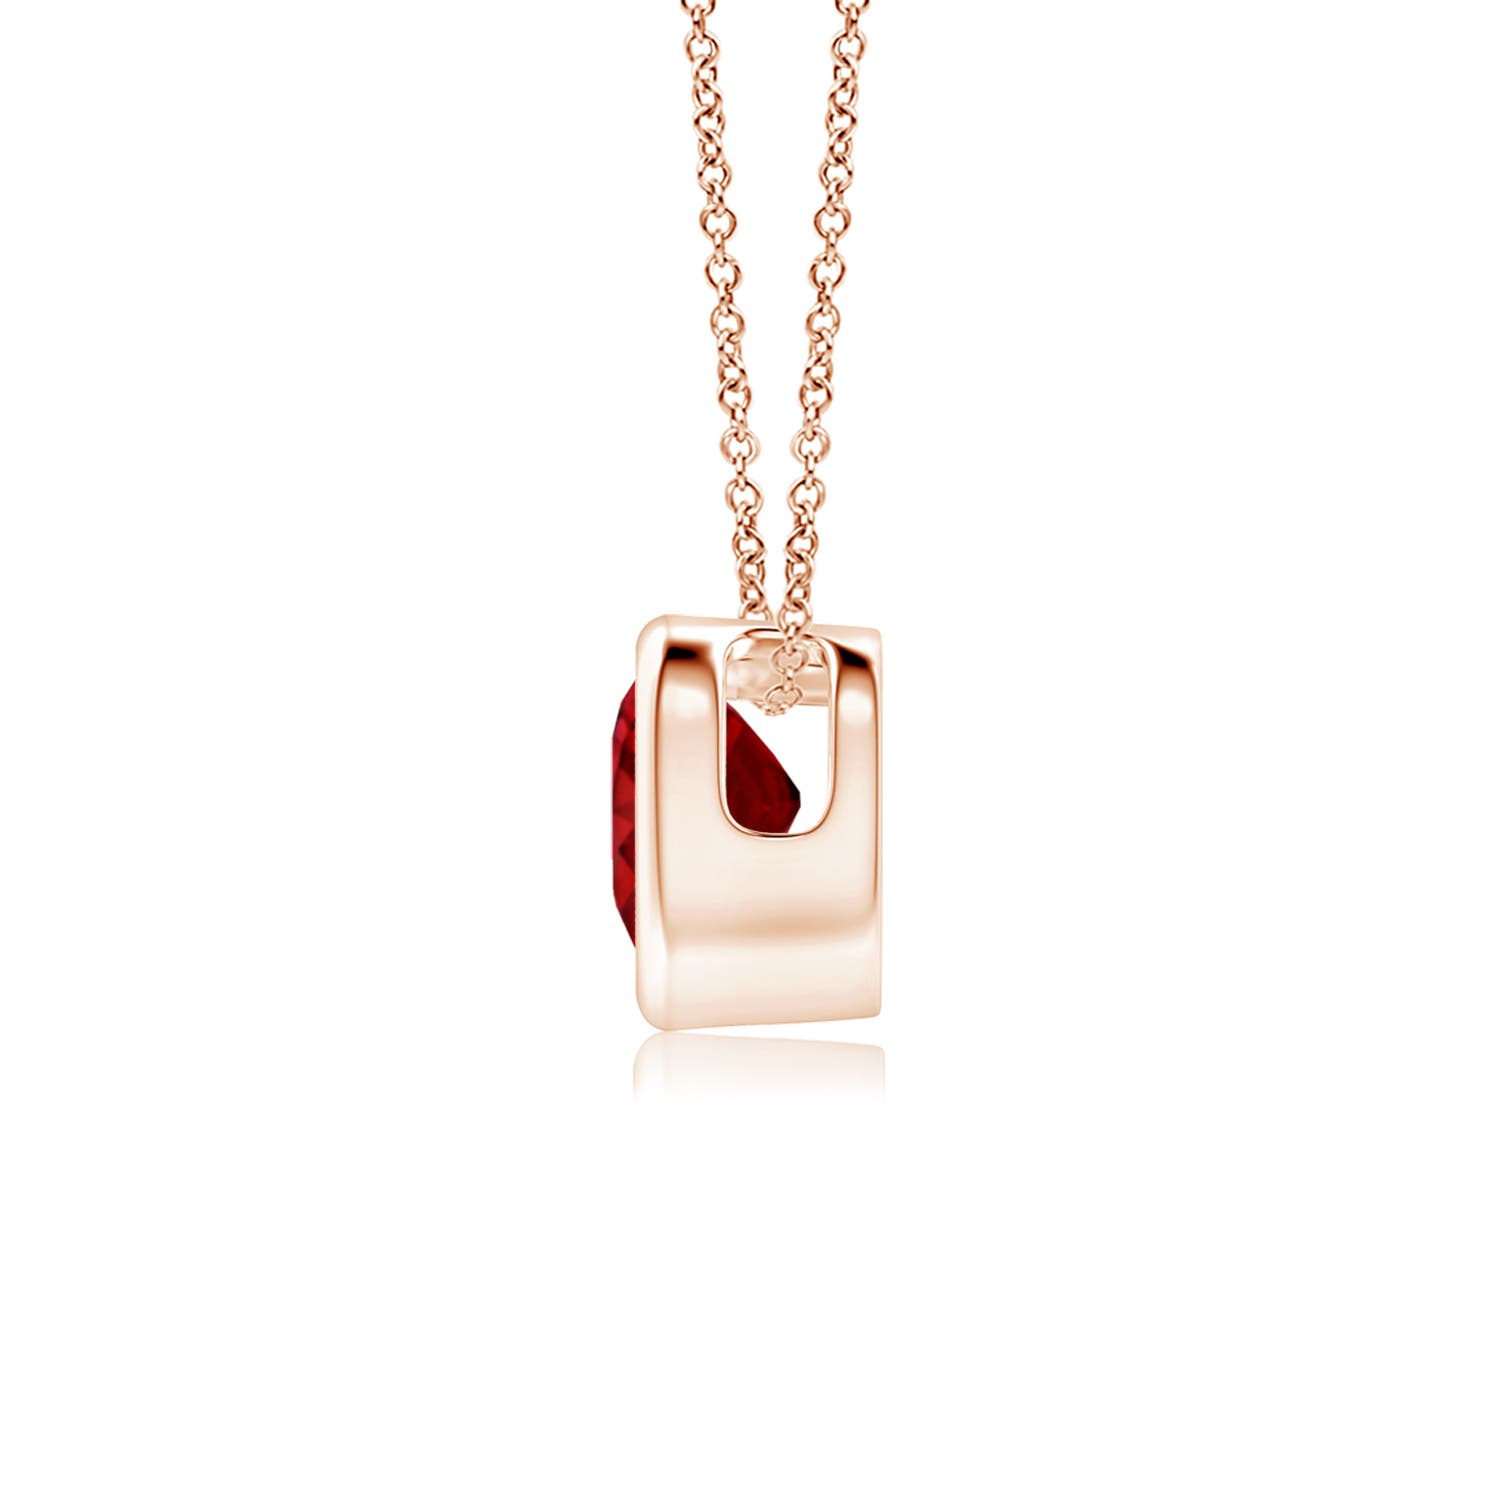 AAAA - Ruby / 0.3 CT / 14 KT Rose Gold